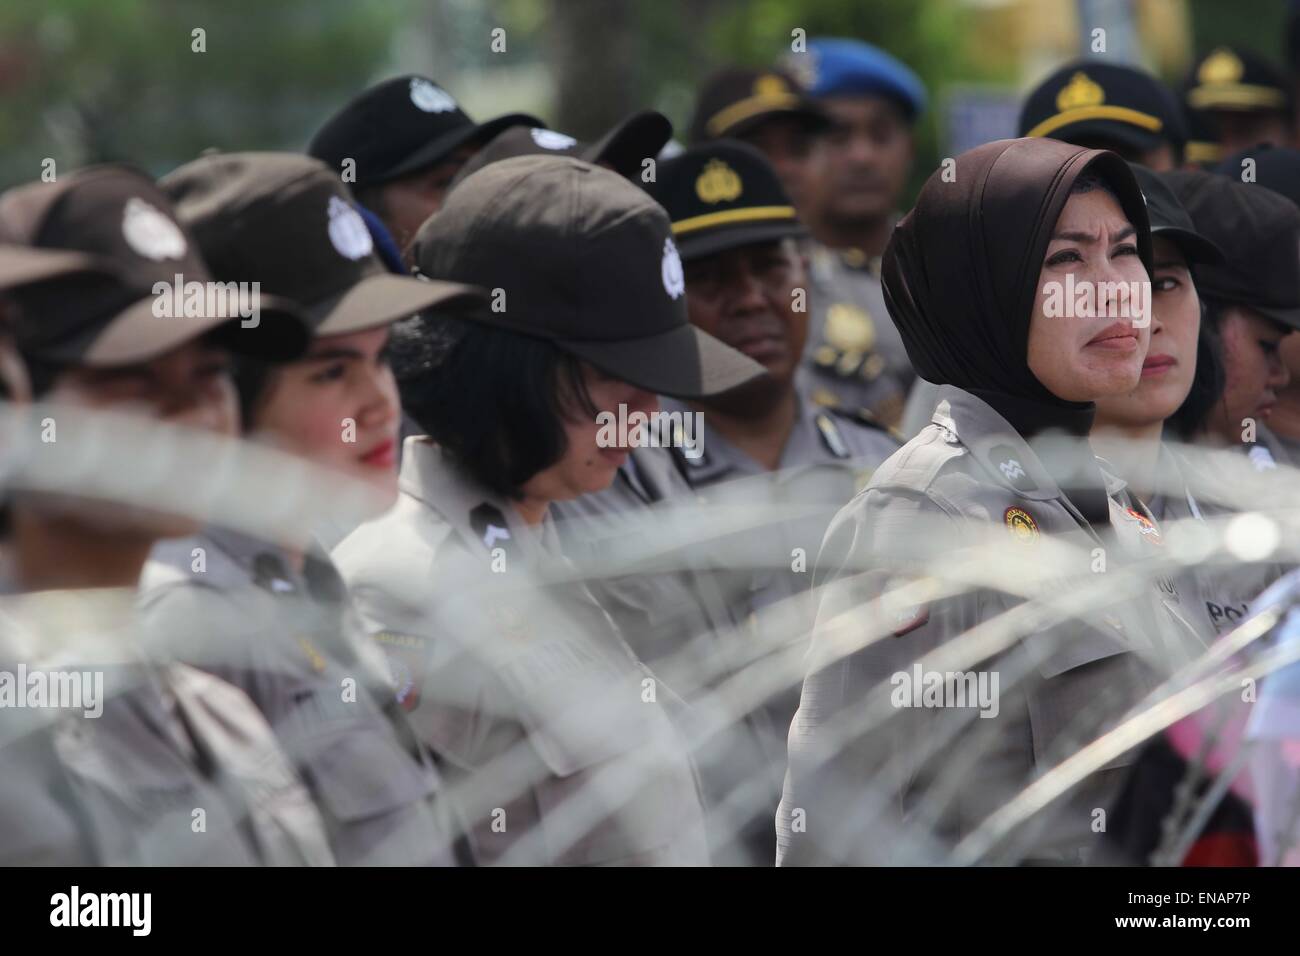 Batam, Kepri, Indonesia. 1st May, 2015. BATAM, INDONESIA - MAY 01: Indonesia police guard labours on action demanding an increase on welfare, health and remove emplyment contarcts during International Labour Day called May Day on Mei 01, 2015 in Batam, Indonesia. Credit:  Sijori Images/ZUMA Wire/Alamy Live News Stock Photo